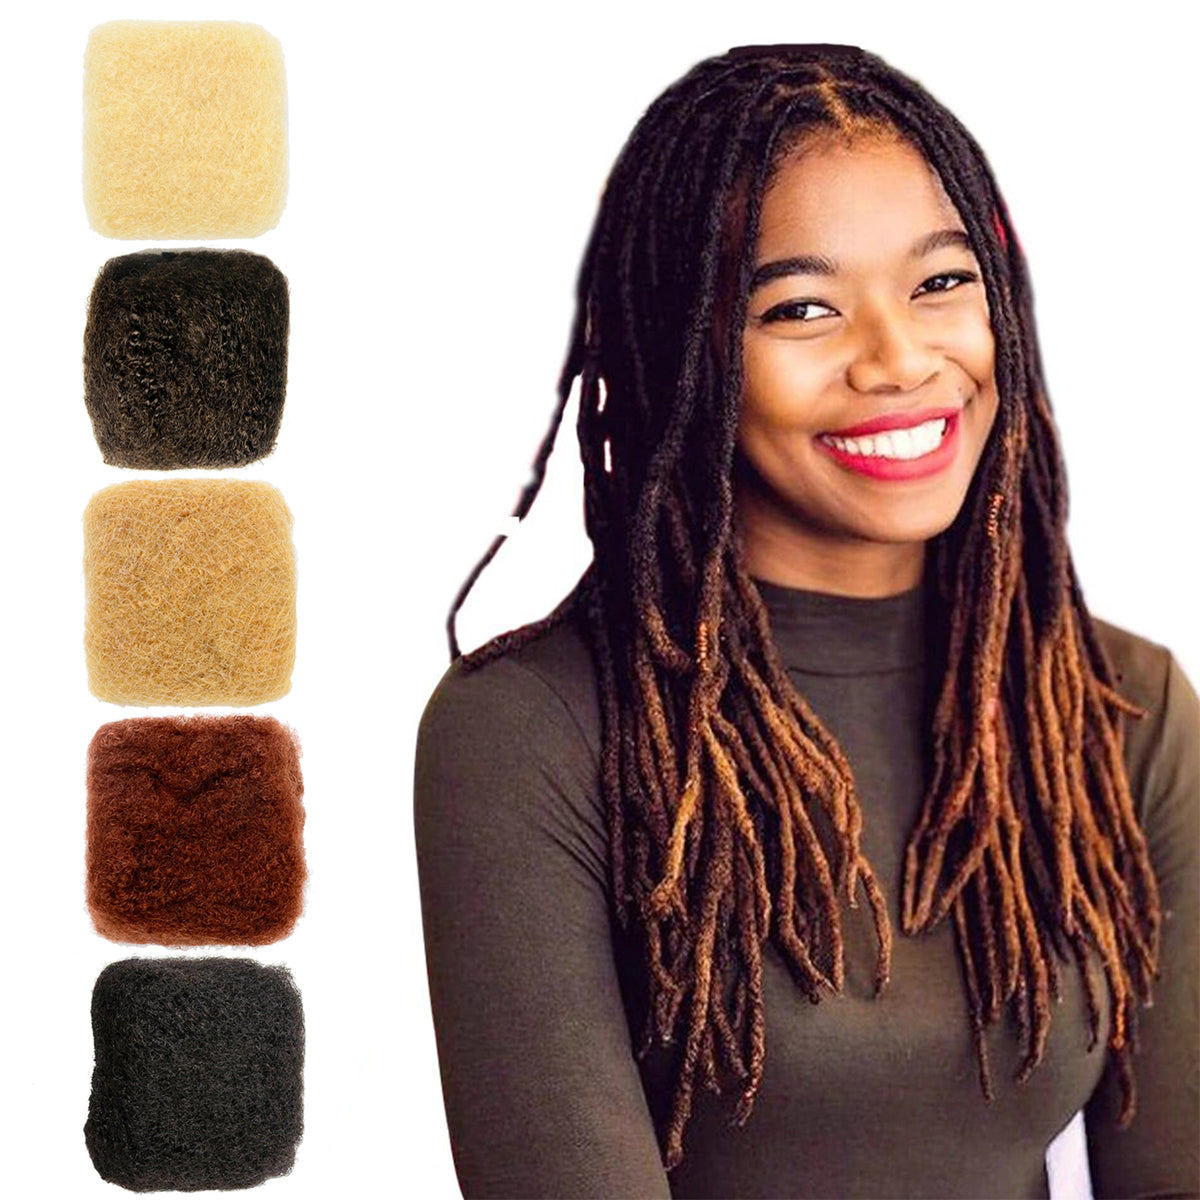 PerfectTranzitions Afro Kinky Human Hairs For Making,Repairing & Bulking Locs 10 Inch Long Afro Kinky Bulk Human Hair For Dreadlock Extensions 100% Natural Afro Hairs For Twisting & Braiding 29g/1Oz (Natural Black,10Inch)